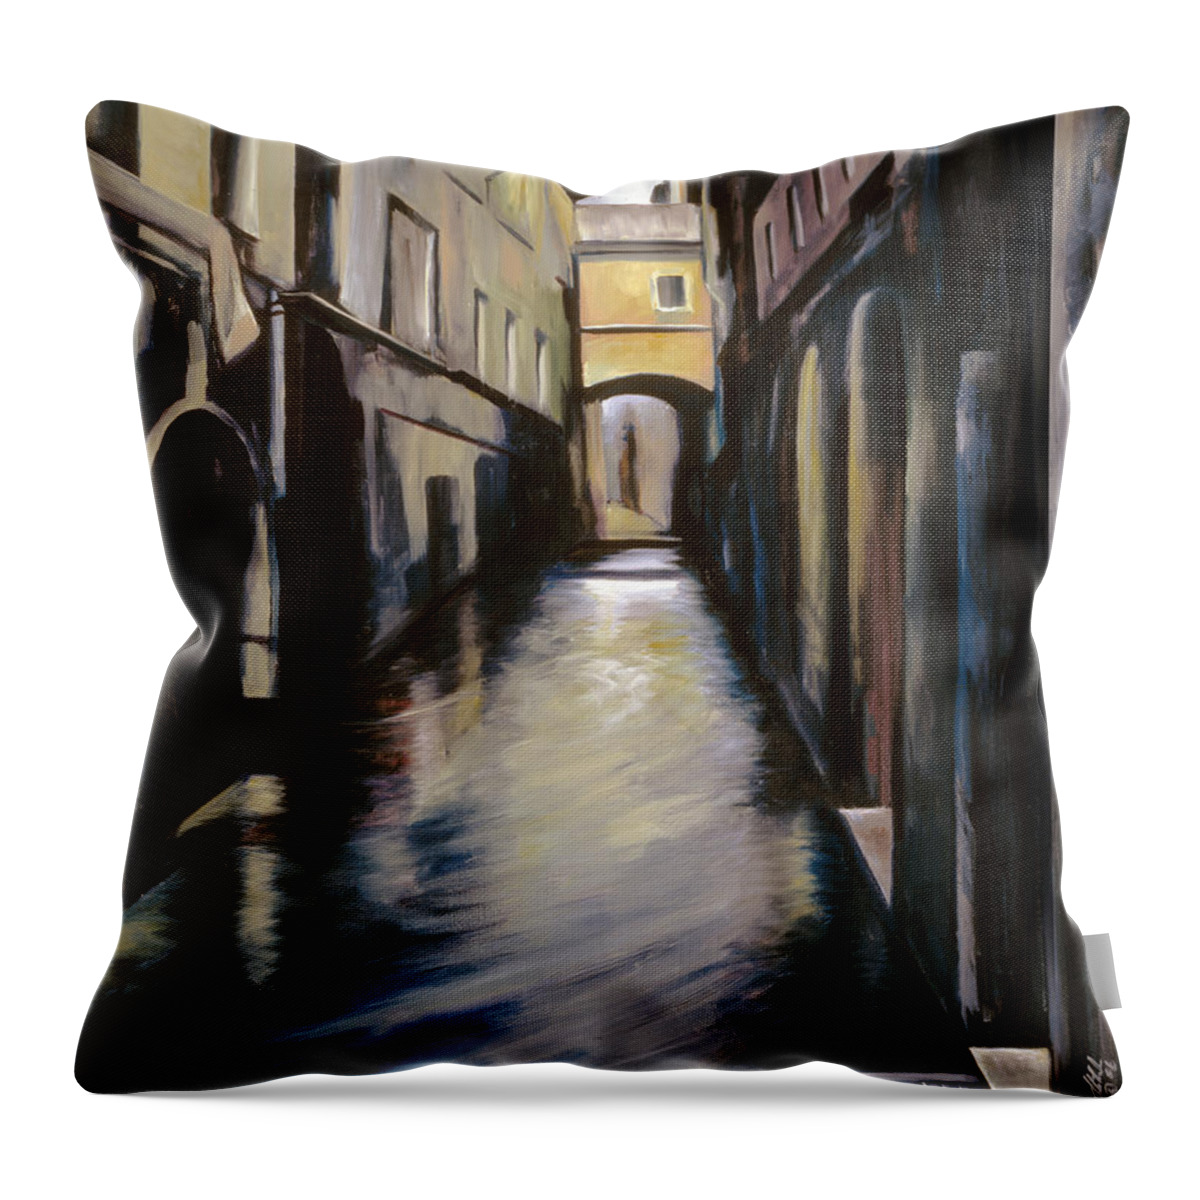 Street; Canal; Venice ; Desert; Abandoned; Dilapidated; Lost; Highway; Route 66; Road; Vacancy; Run-down; Building; Old Signage; Nostalgia; Vintage; James Christopher Hill; Jameshillgallery.com; Foliage; Sky; Realism; Oils; Venice Throw Pillow featuring the painting Venice by James Hill